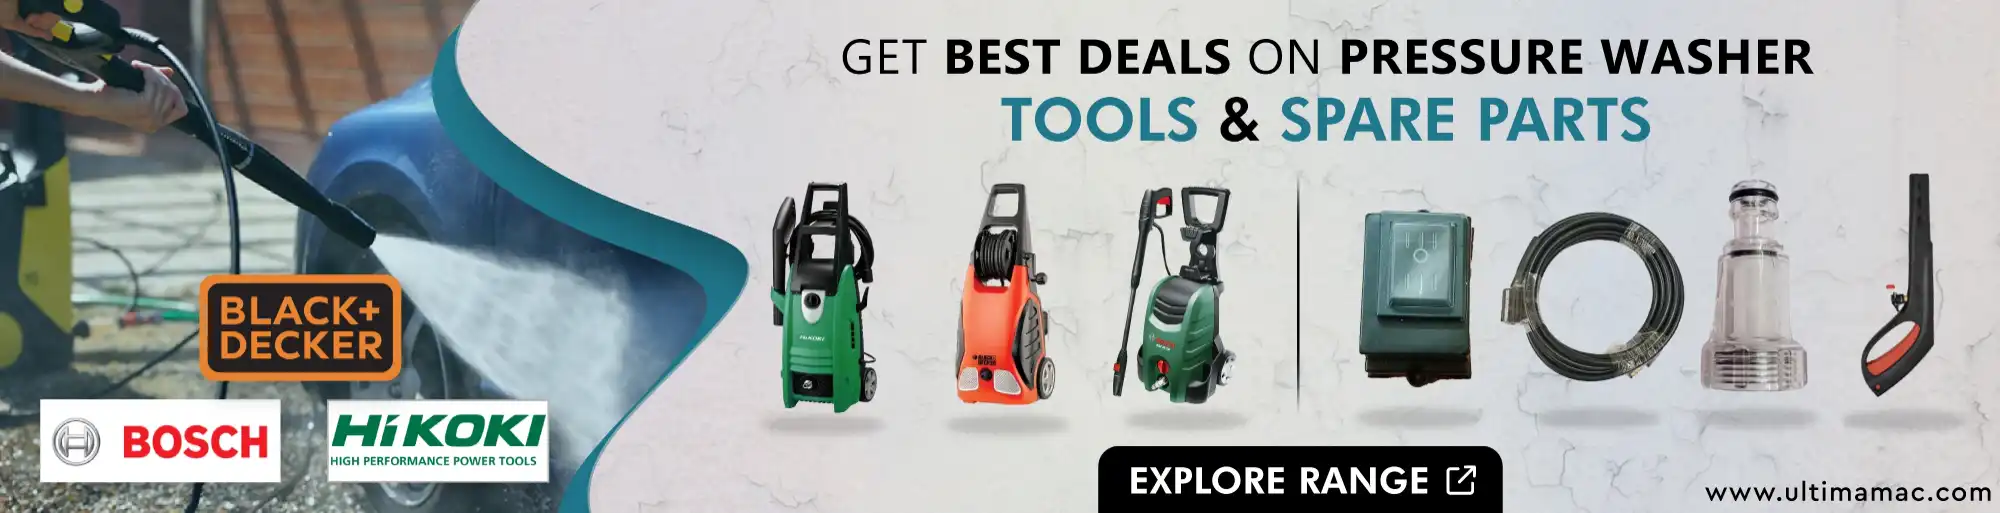 Pressure Washer Power Tools & Spare Parts